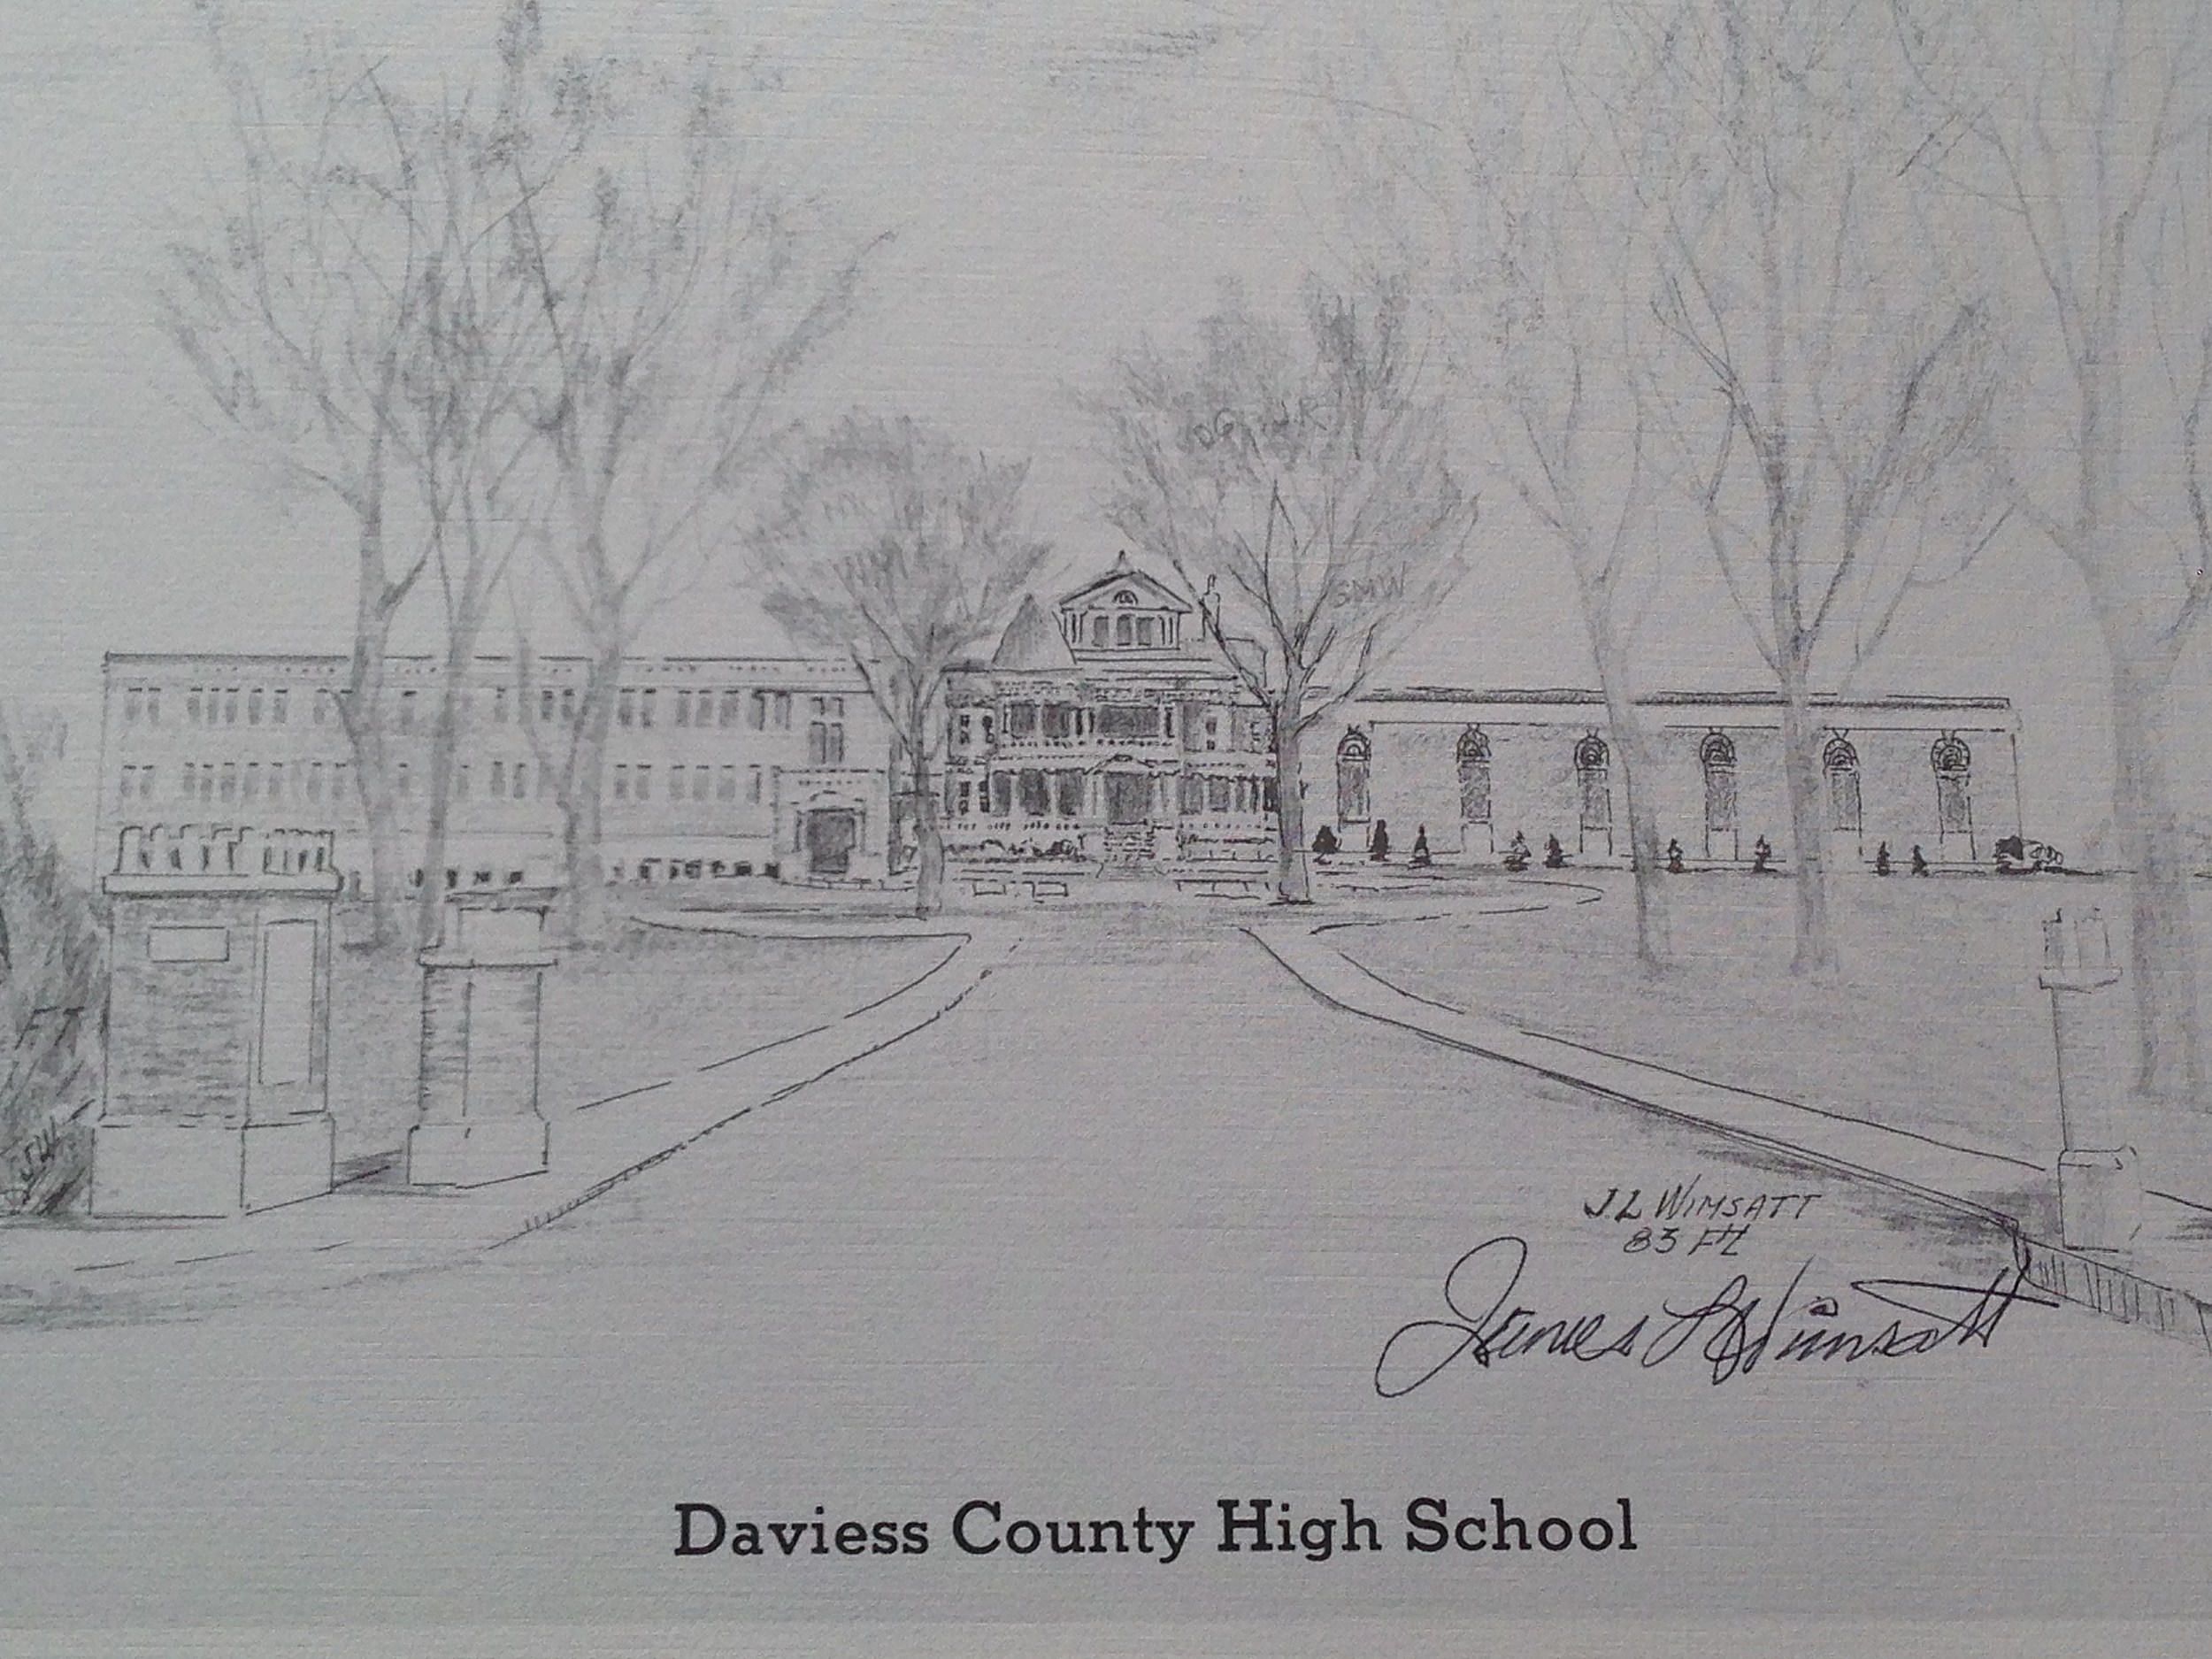 FileSketch or drawing of Pacoima School Los Angeles County 1905png   Wikimedia Commons